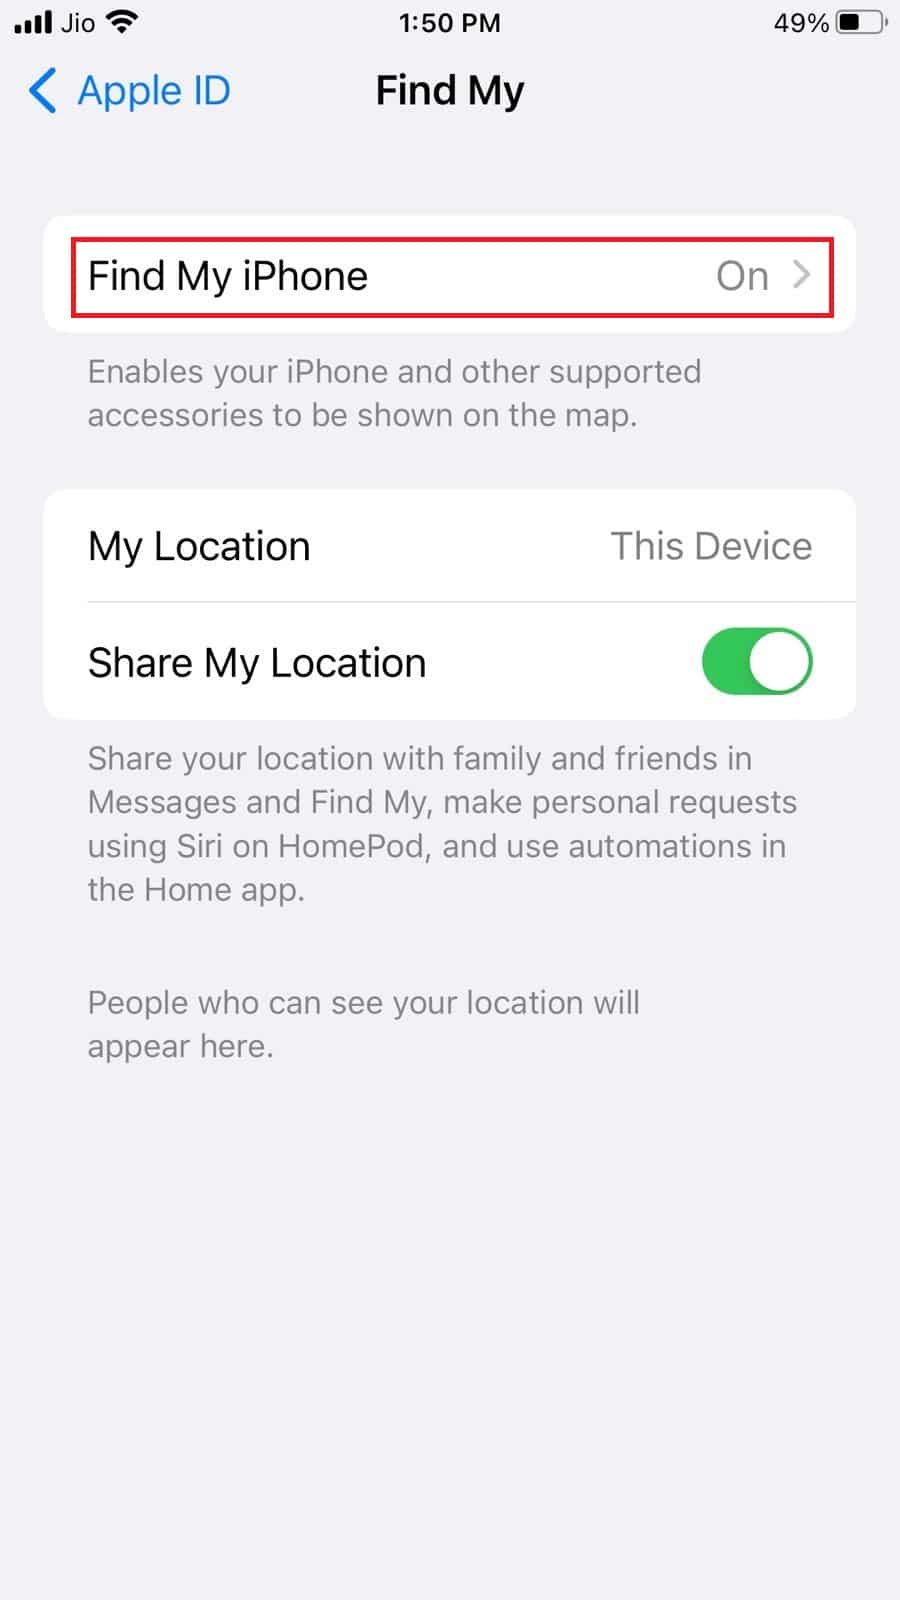 tap on Find My iPhone to toggle the option off